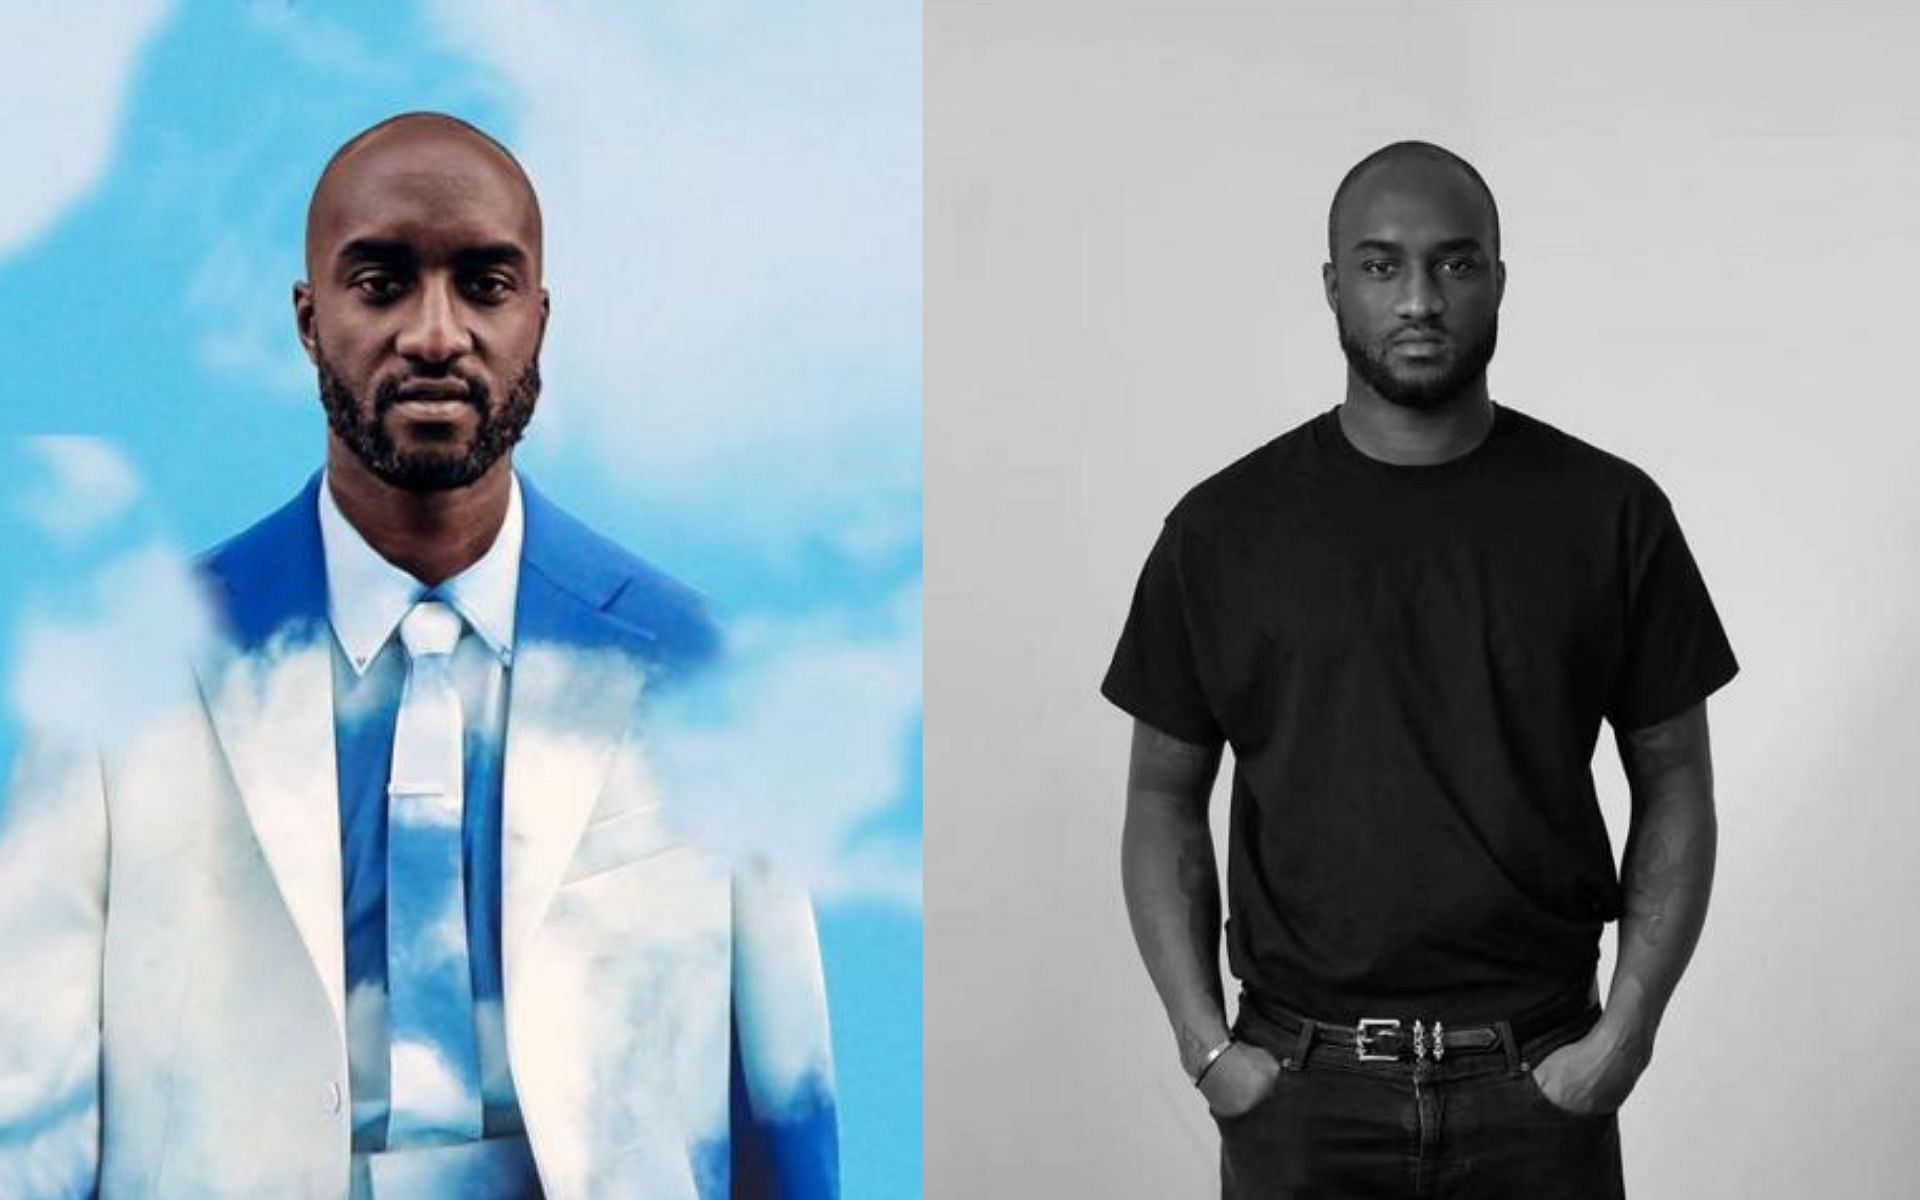 Louis Vuitton honors late designer Virgil Abloh with his final collection